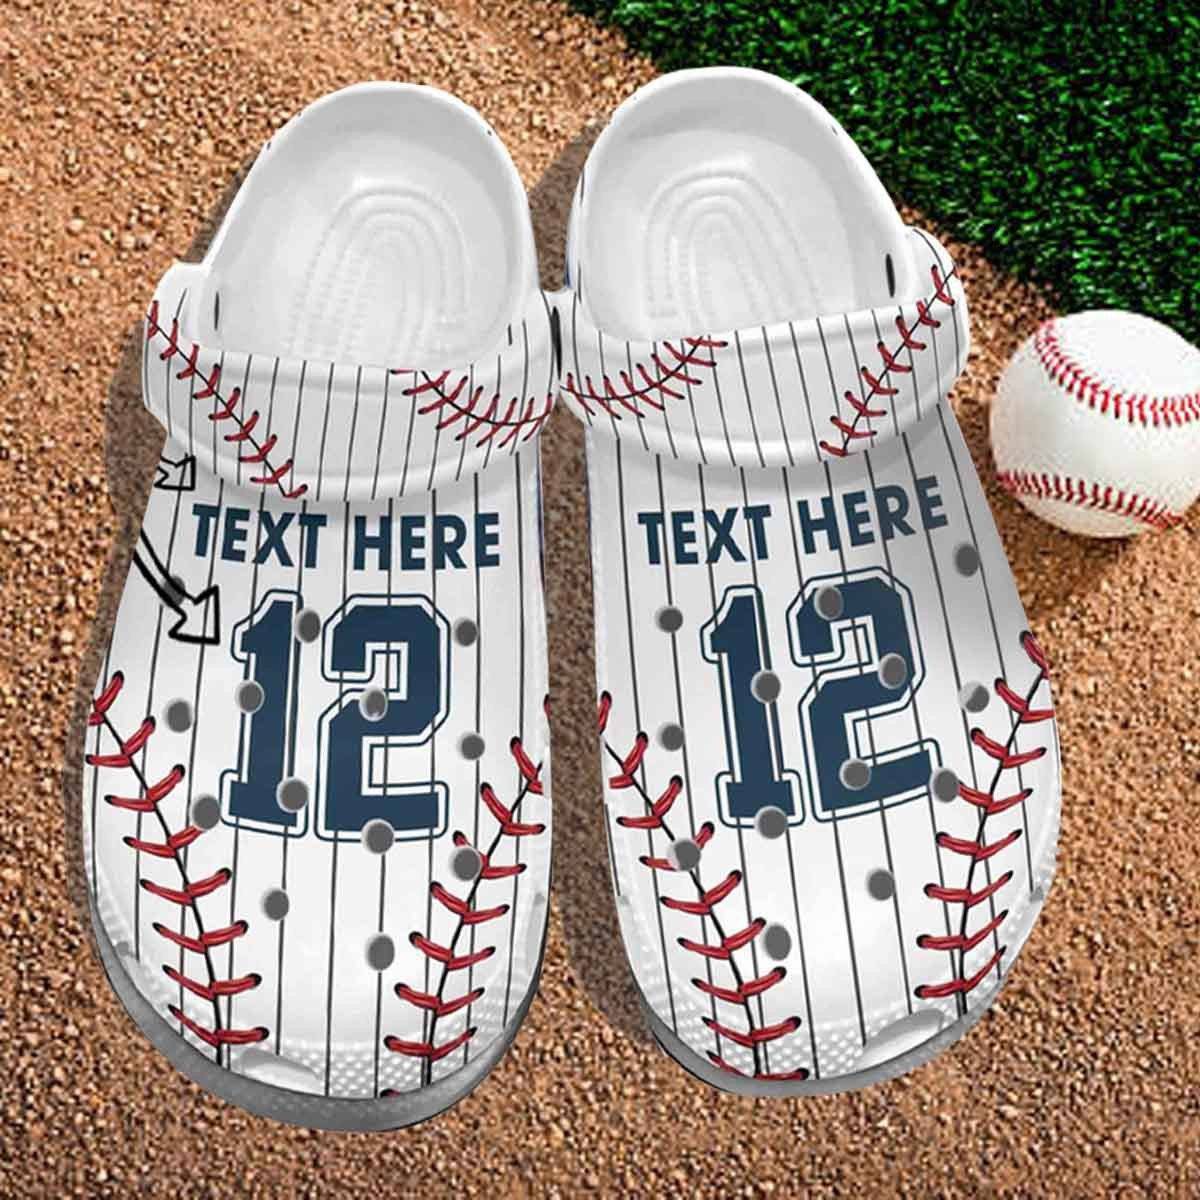 Baseball Uniform Player Crocss Shoes Clogs For Batter – Funny Baseball Personalized Crocss Shoes Birthday Gifts Son Daughter